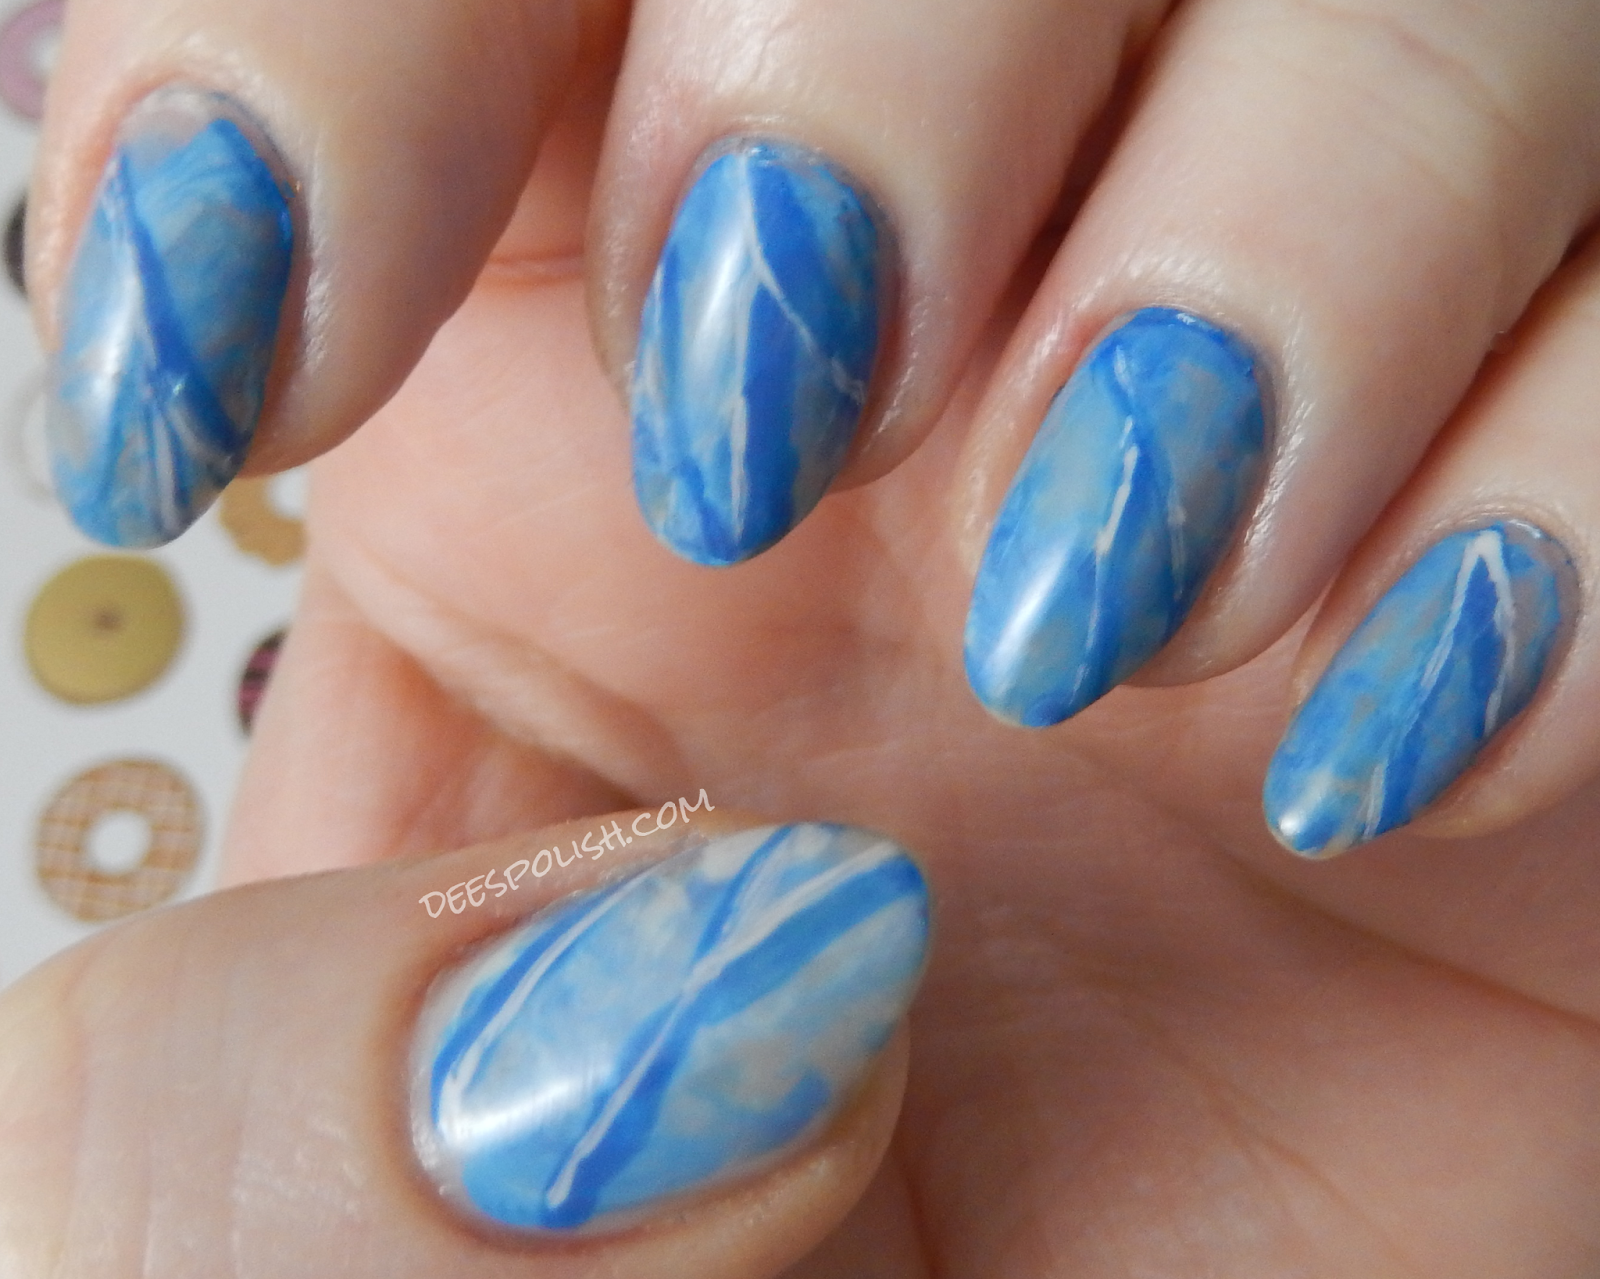 2. Neon Blue Marble Nails - wide 3